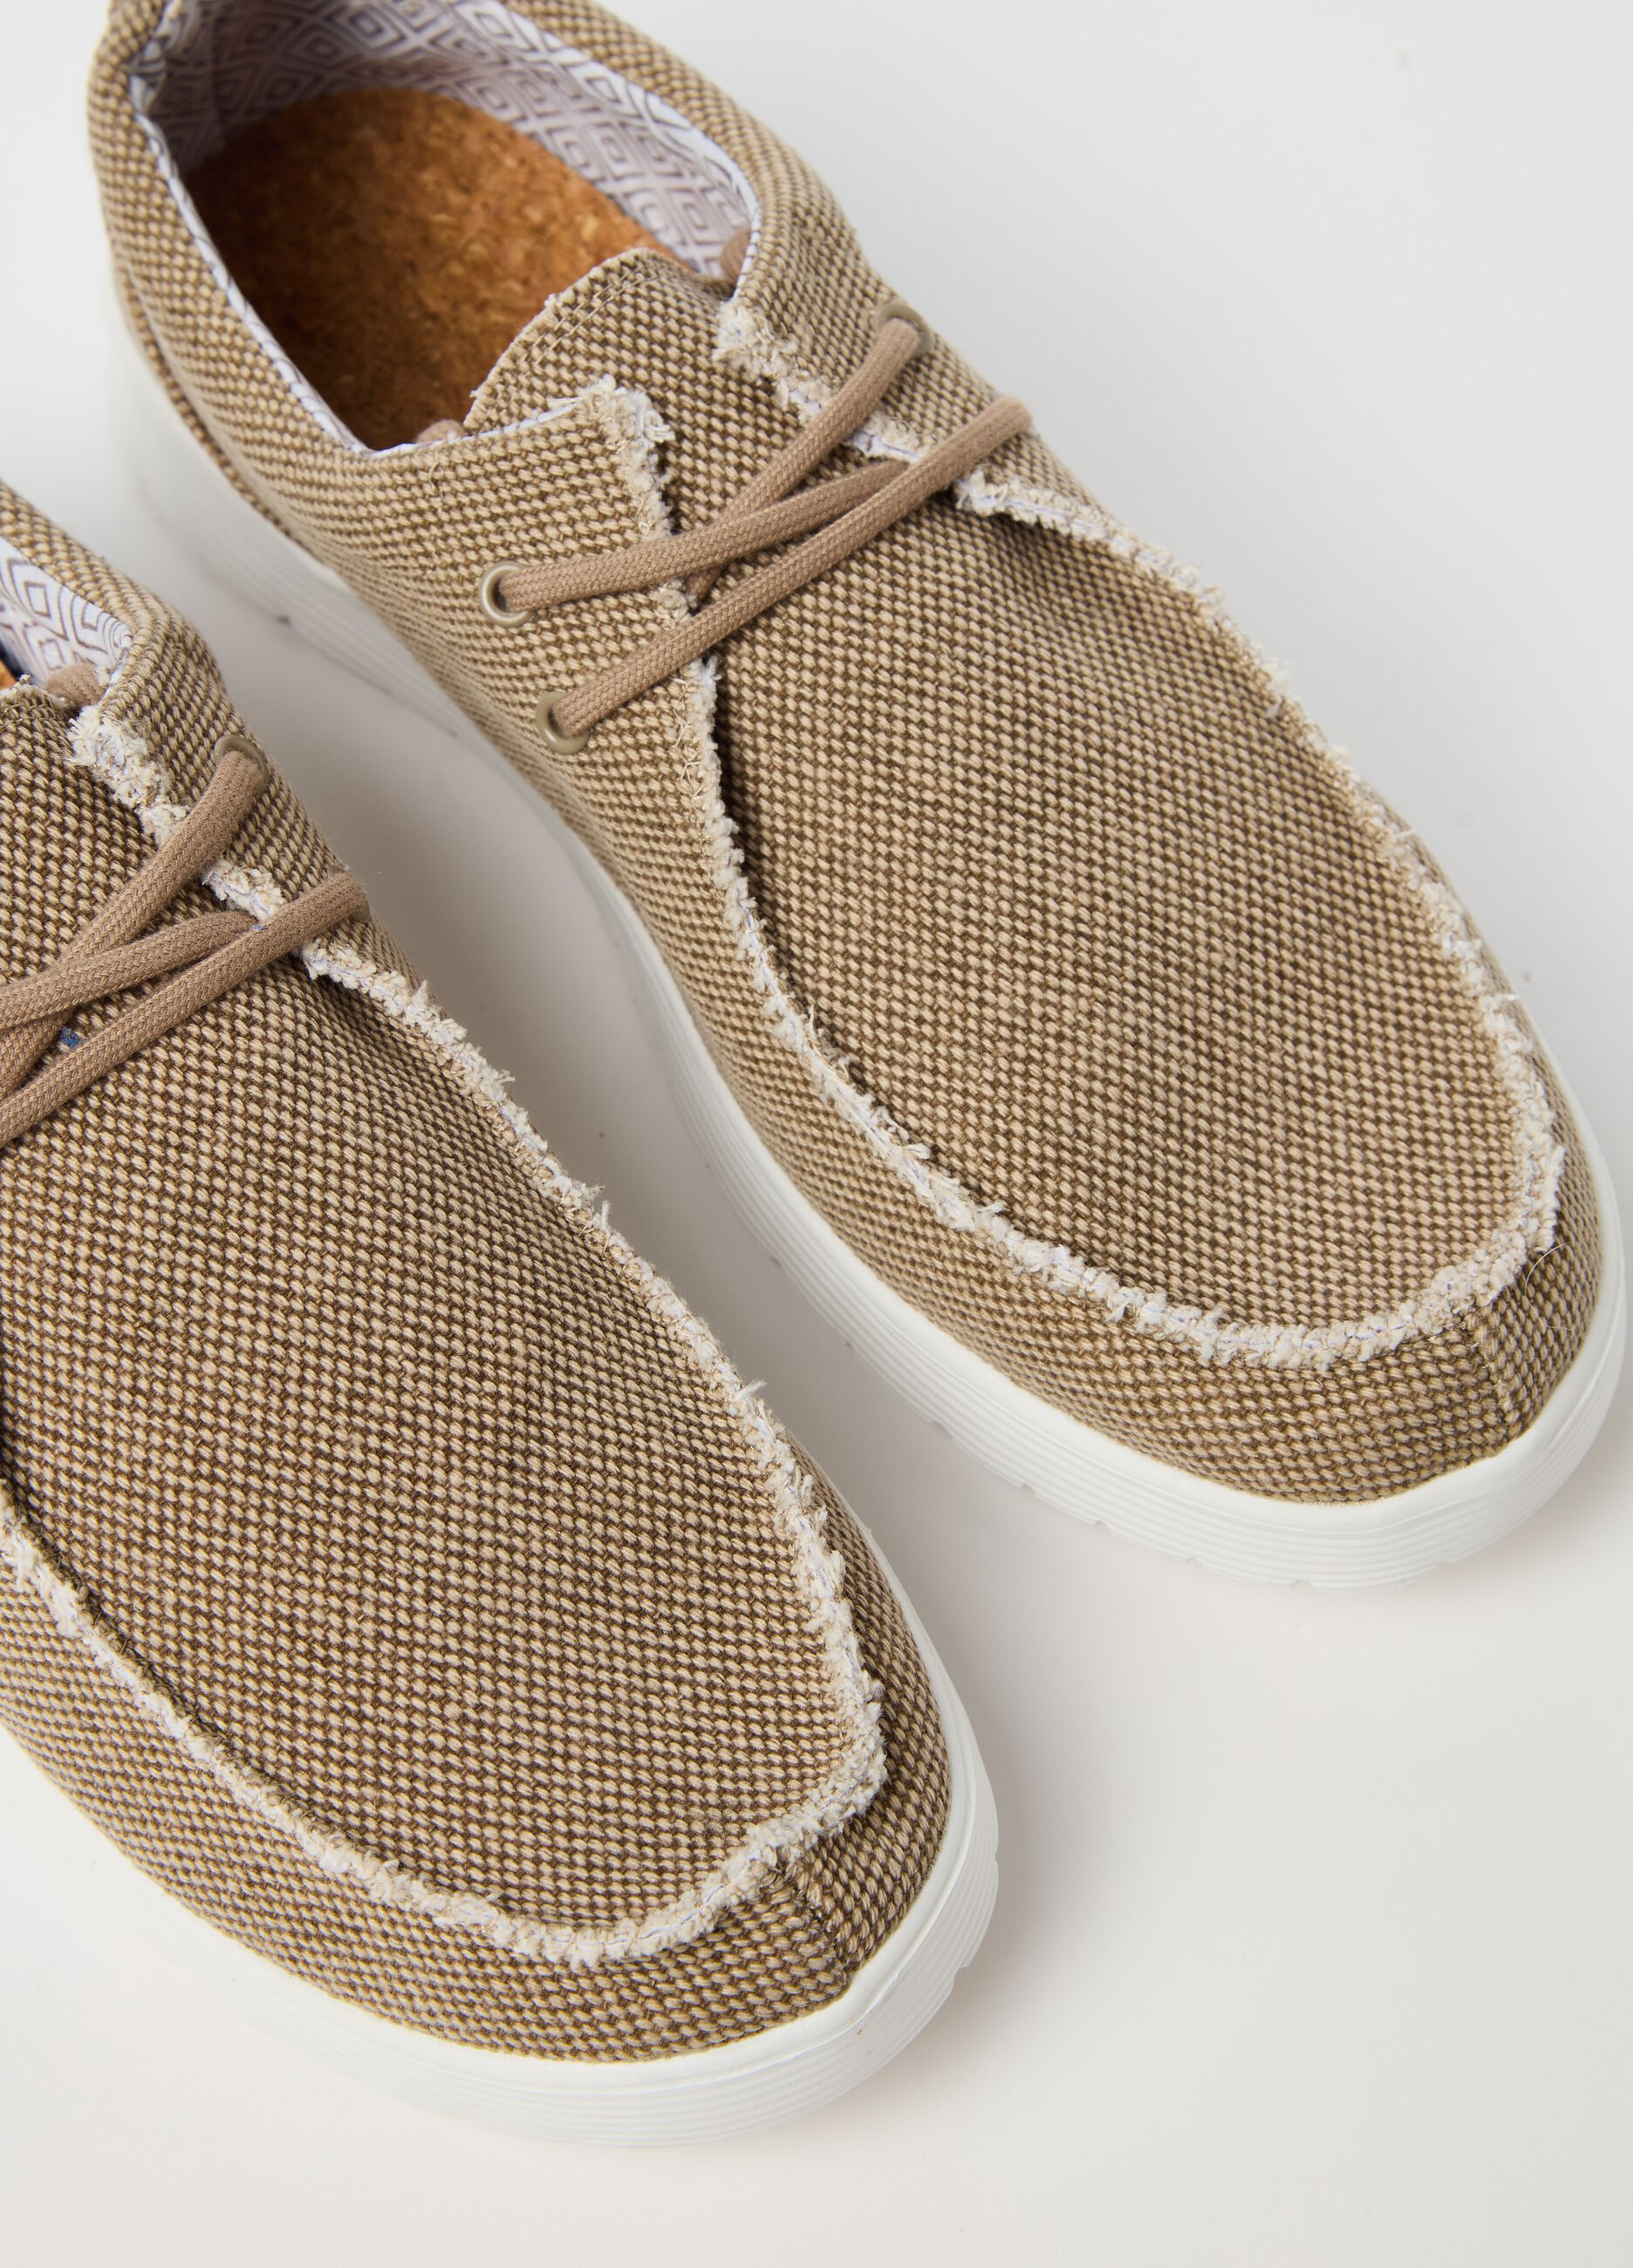 Lace-up shoe in canvas